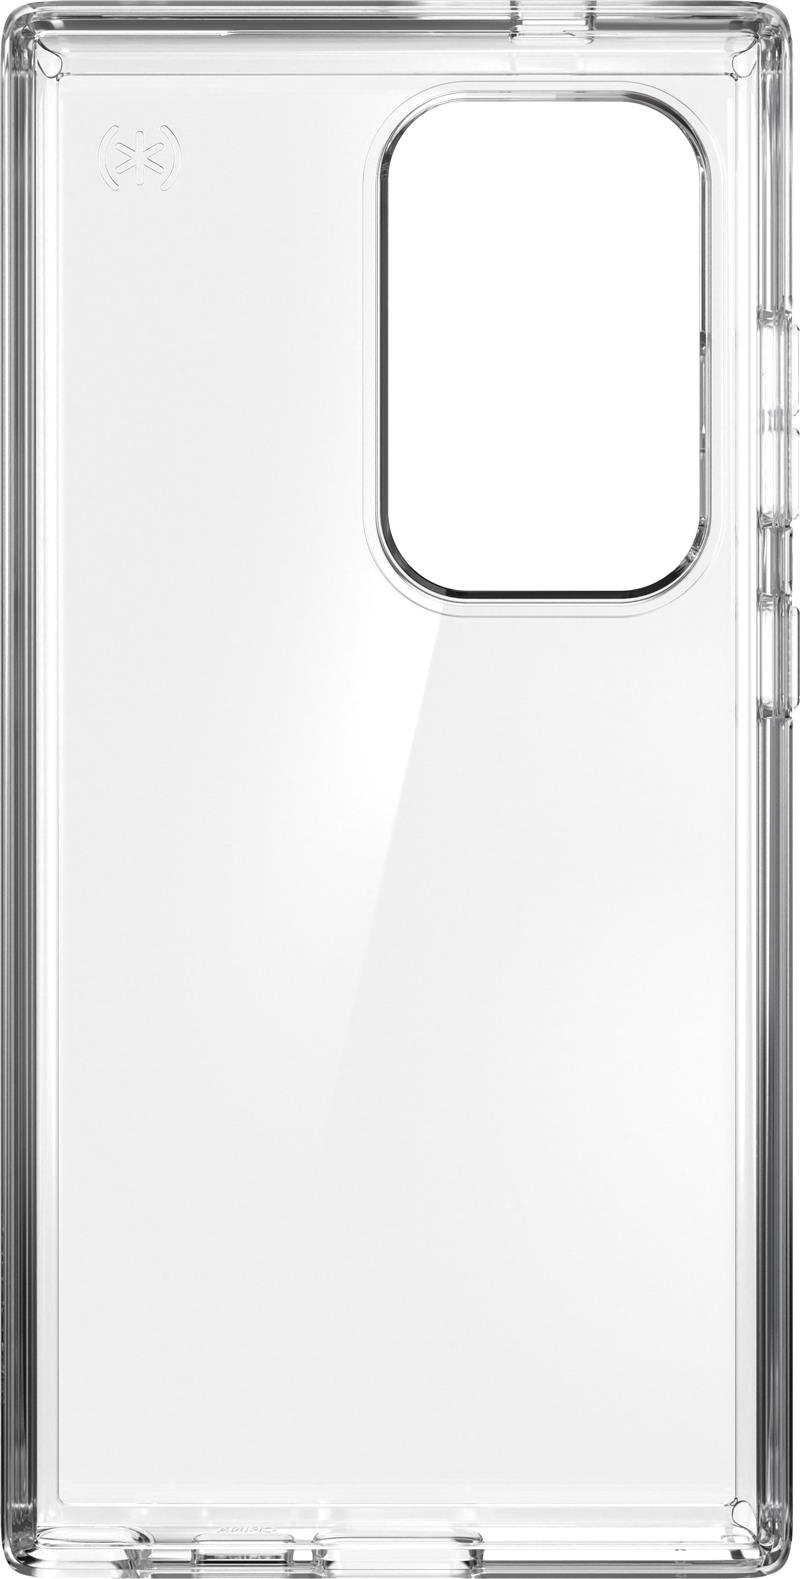 Speck Presidio Perfect Clear Samsung Galaxy S24 Ultra Clear - with Microban